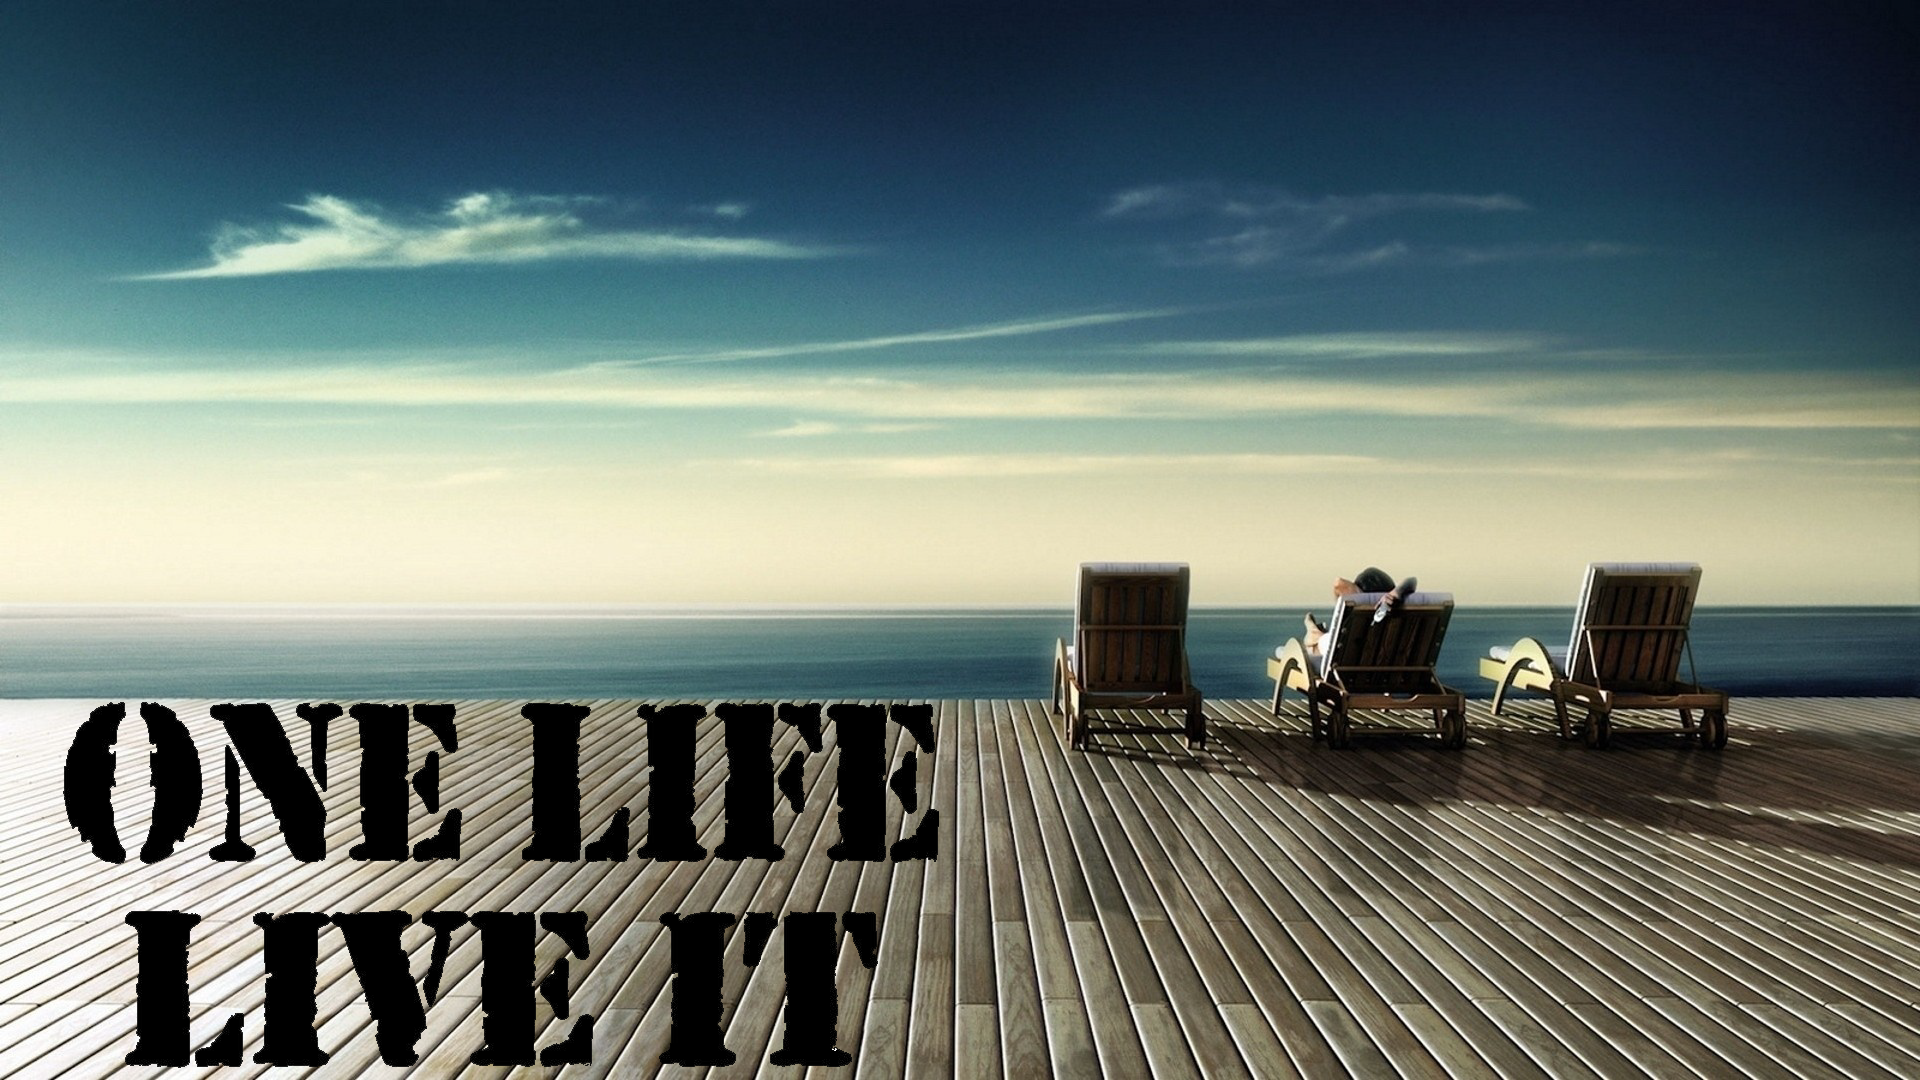 This life you need. Live the Life. One Life to Live. Live by you. Live a Life by Design not by default.